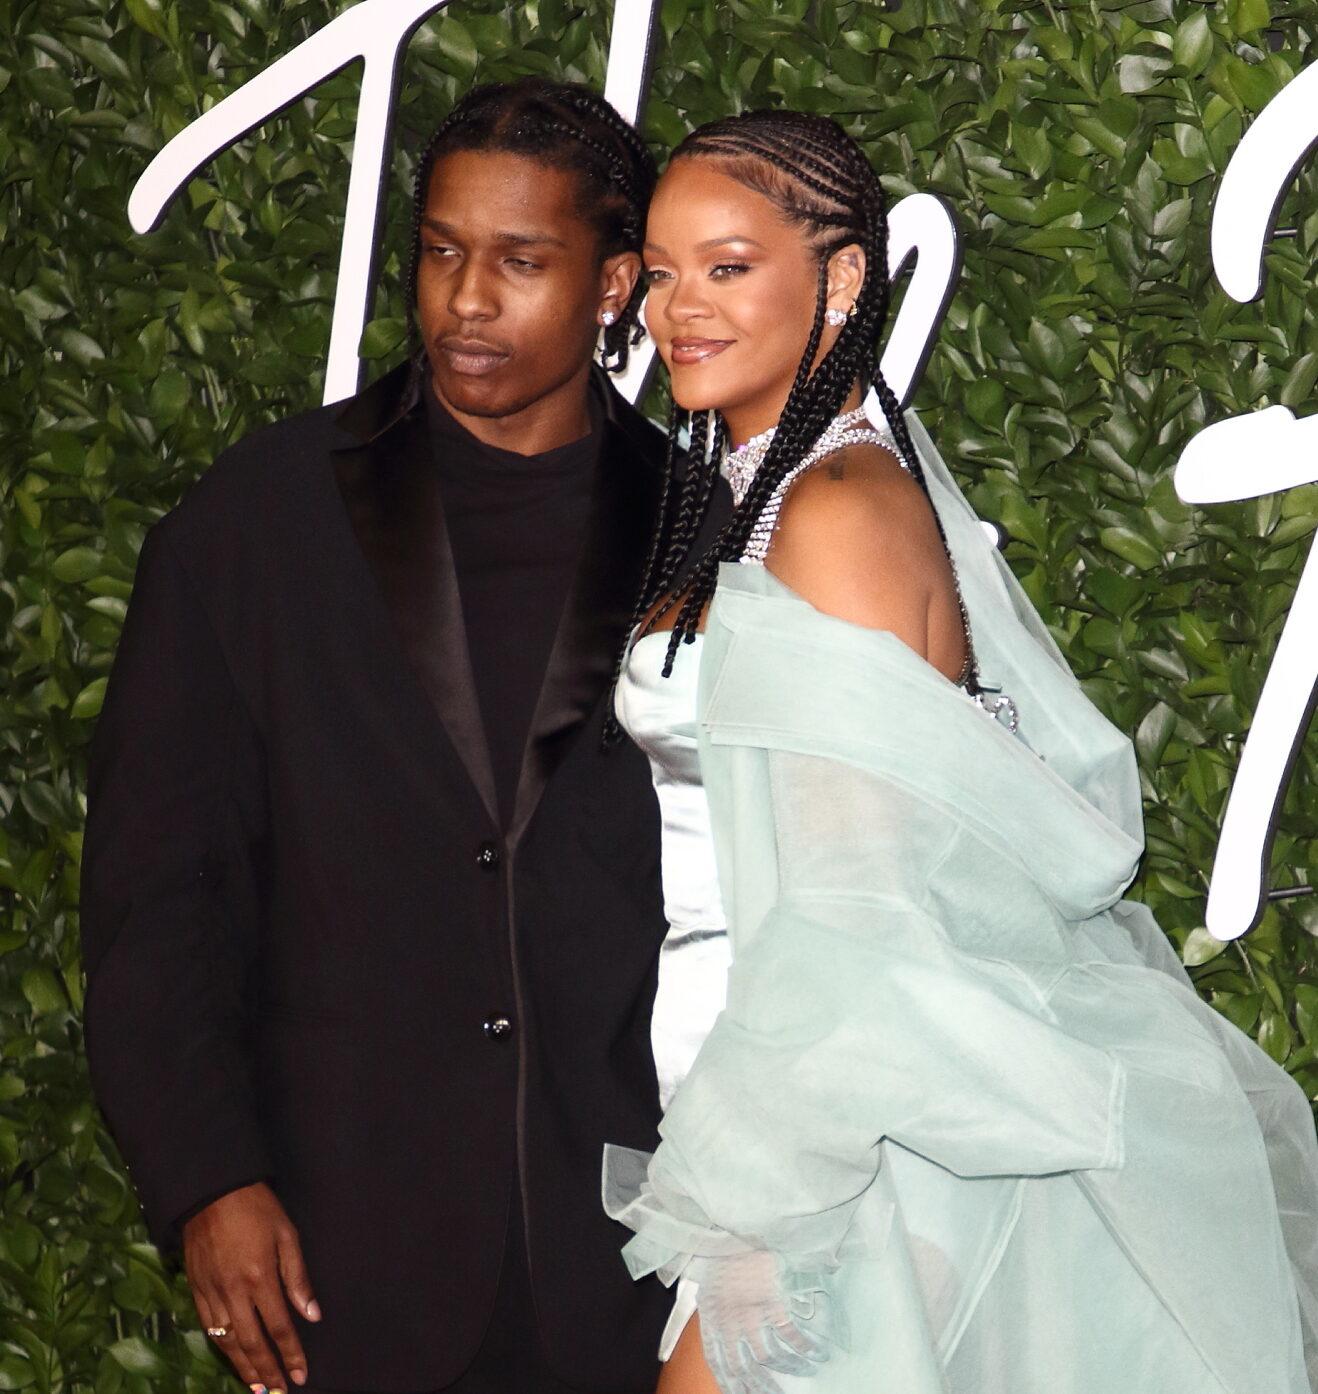 ASAP Rocky and Rihanna on the red carpet at The Fashion Awards, Royal Albert Hall, London on Monday December 2nd 2019